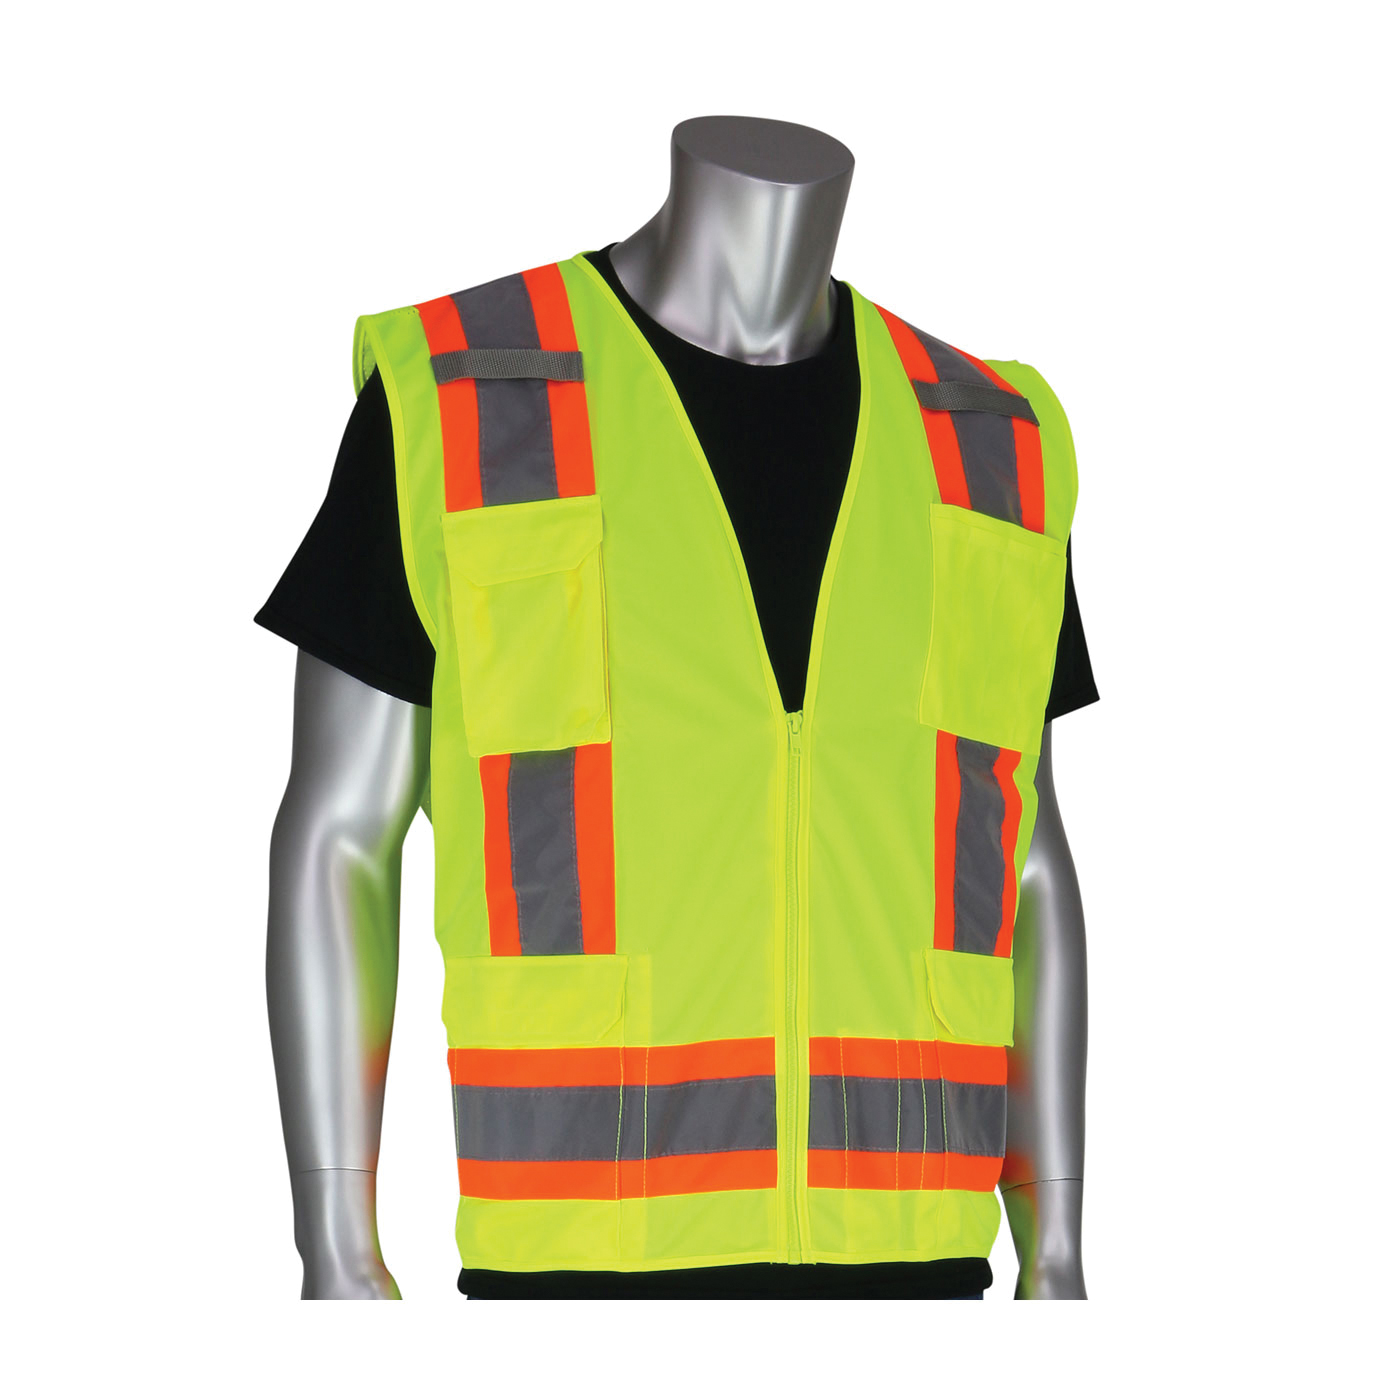 PIP® 302-0500-YEL/XL 2-Tone Surveyor Safety Vest, XL, Hi-Viz Lime Yellow, Polyester/Solid Tricot, Zipper Closure, 11 Pockets, ANSI Class: Class 2, Specifications Met: ANSI 107 Type R